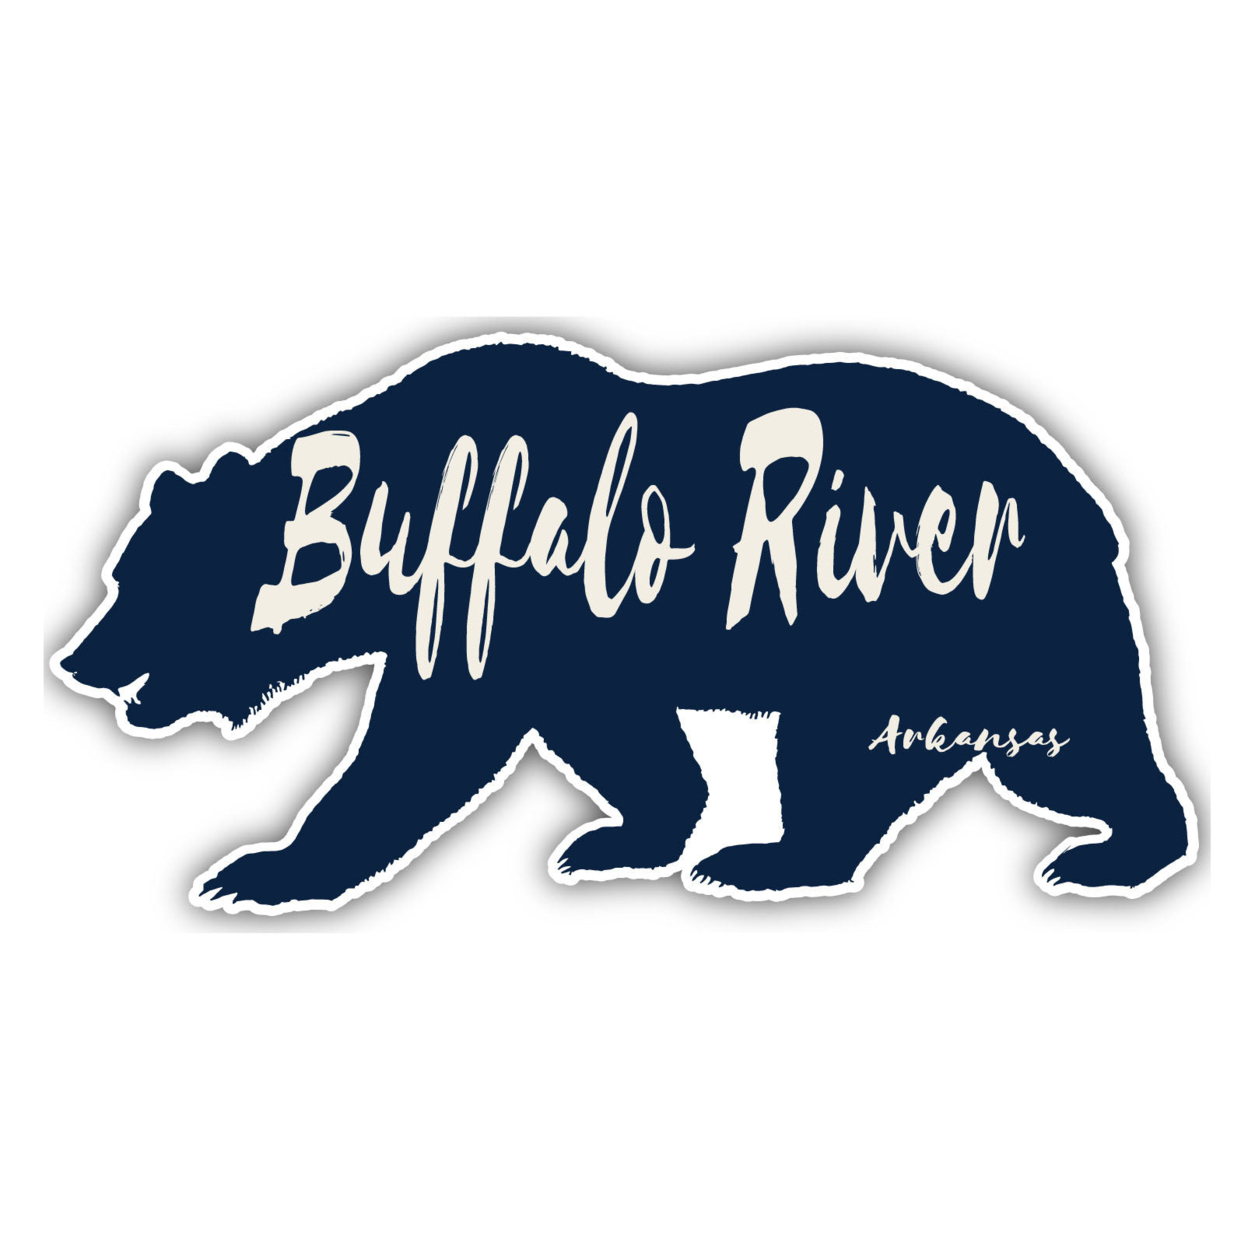 Buffalo River Arkansas Souvenir Decorative Stickers (Choose Theme And Size) - 4-Pack, 10-Inch, Great Outdoors